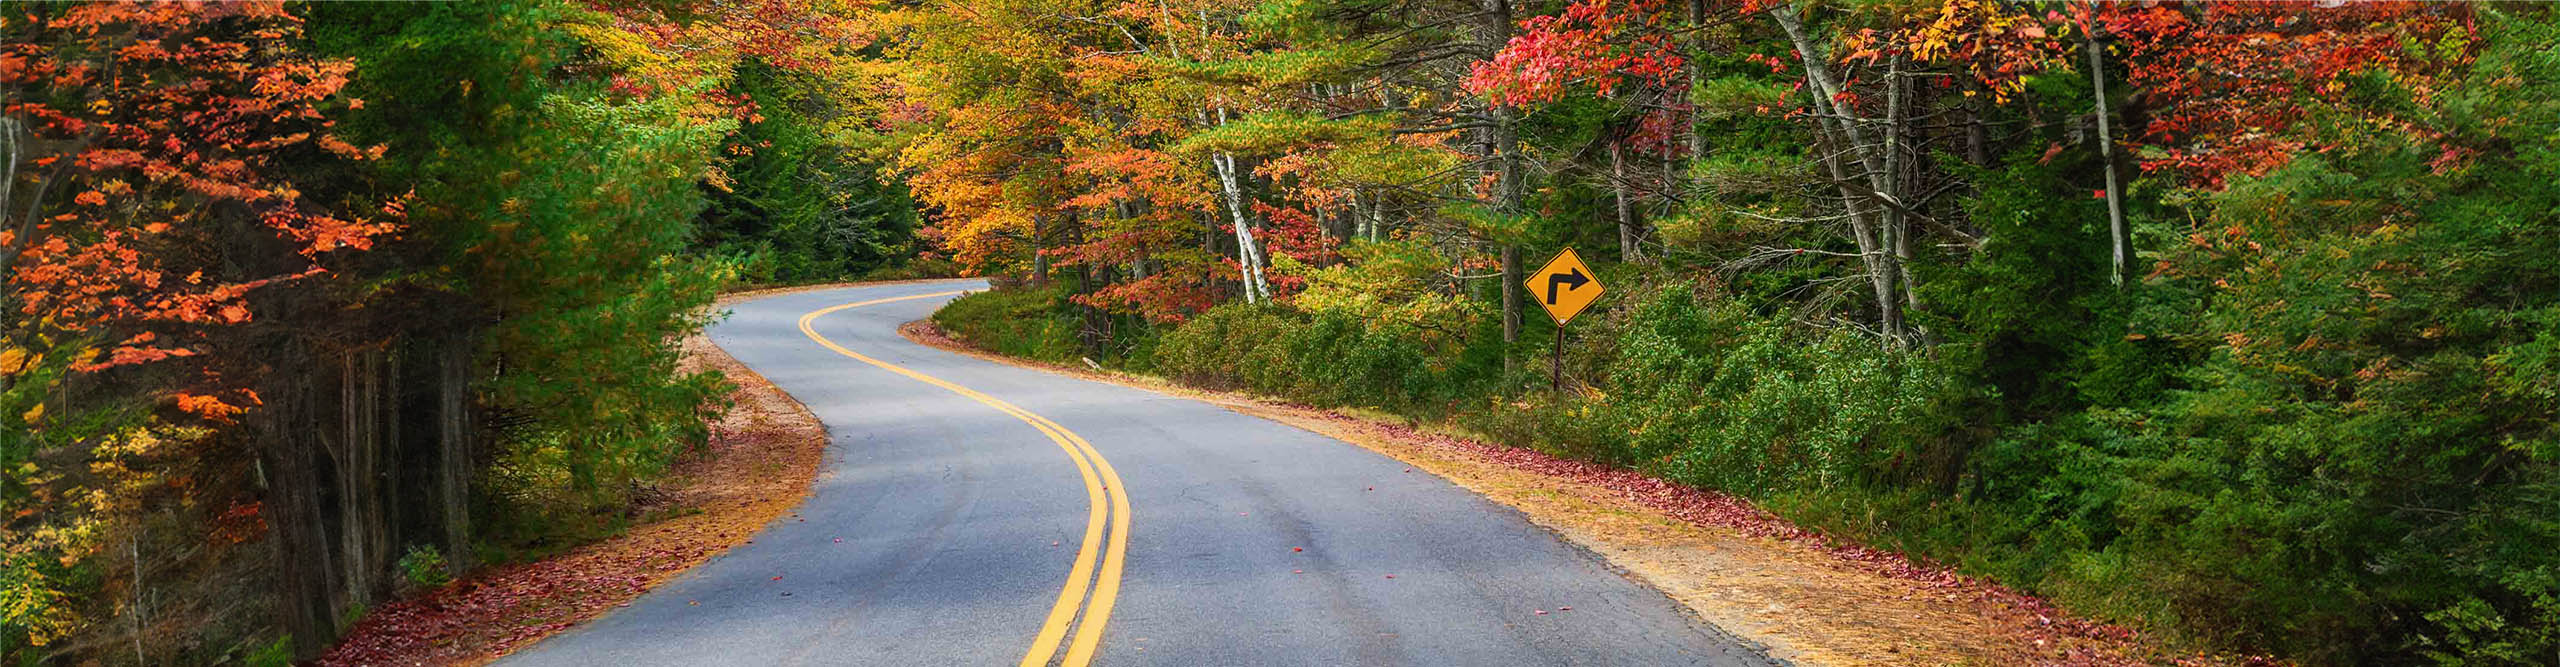 Road winding through the forest filled with autumn colours, Maine, USA